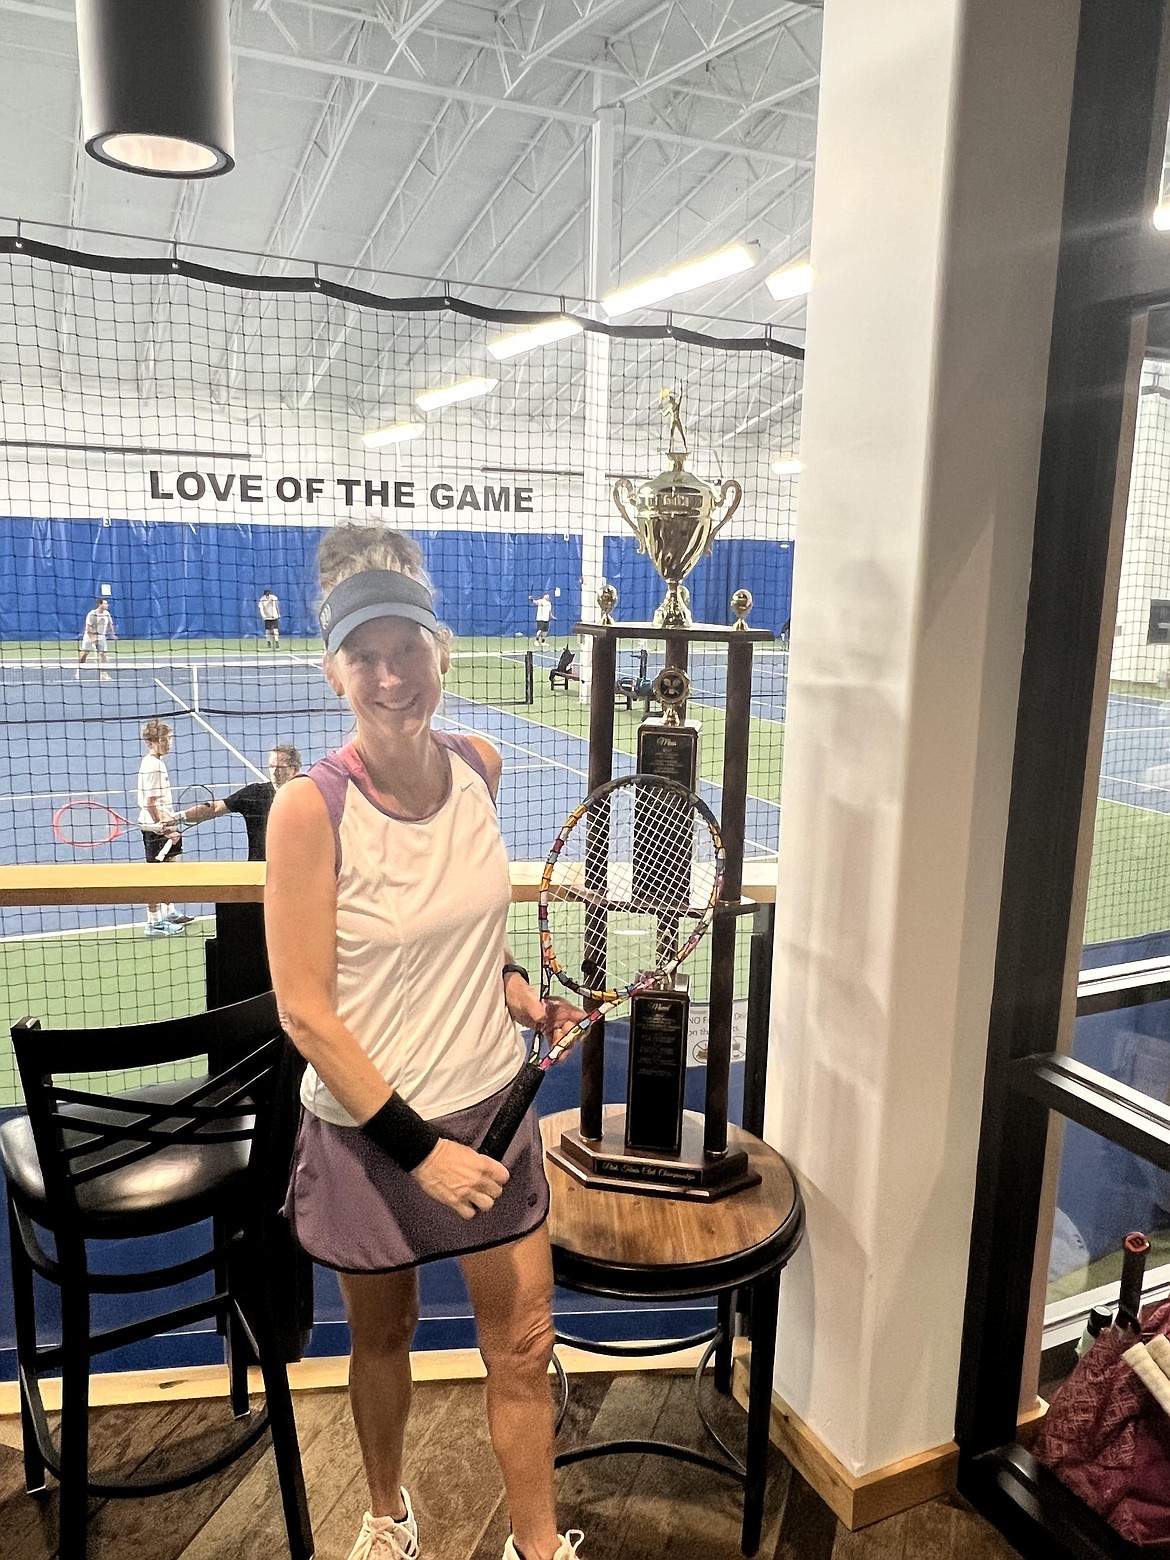 Courtesy photo
The women's open singles champion at the recent Peak Hayden member tennis tournament was Tish Litven, who defeated Angie Gibbar 6-2, 7-6 (5).